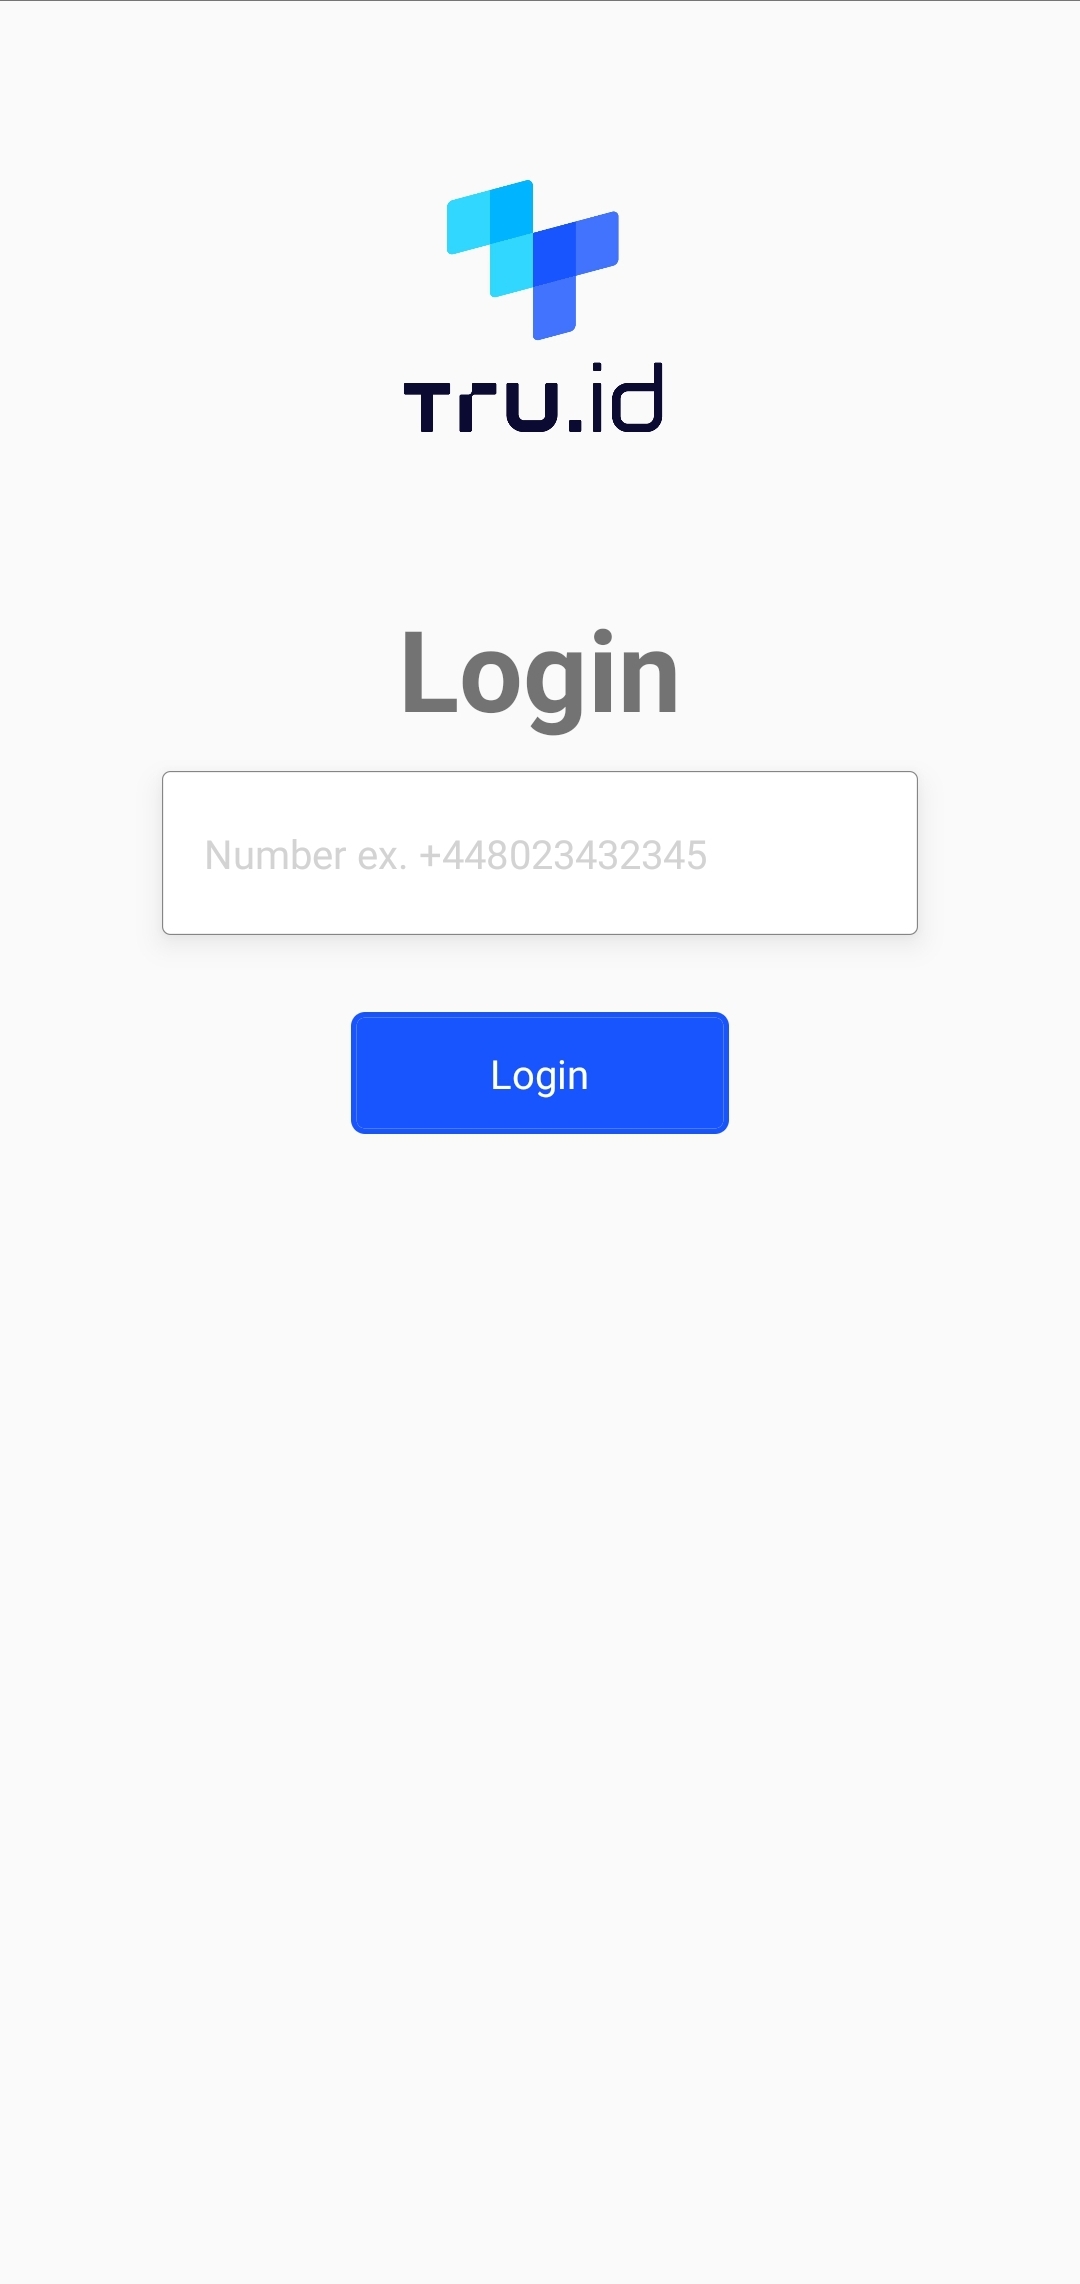 A tru.ID mobile app screen with the tru.ID logo, a phone number text input, and a submit button.